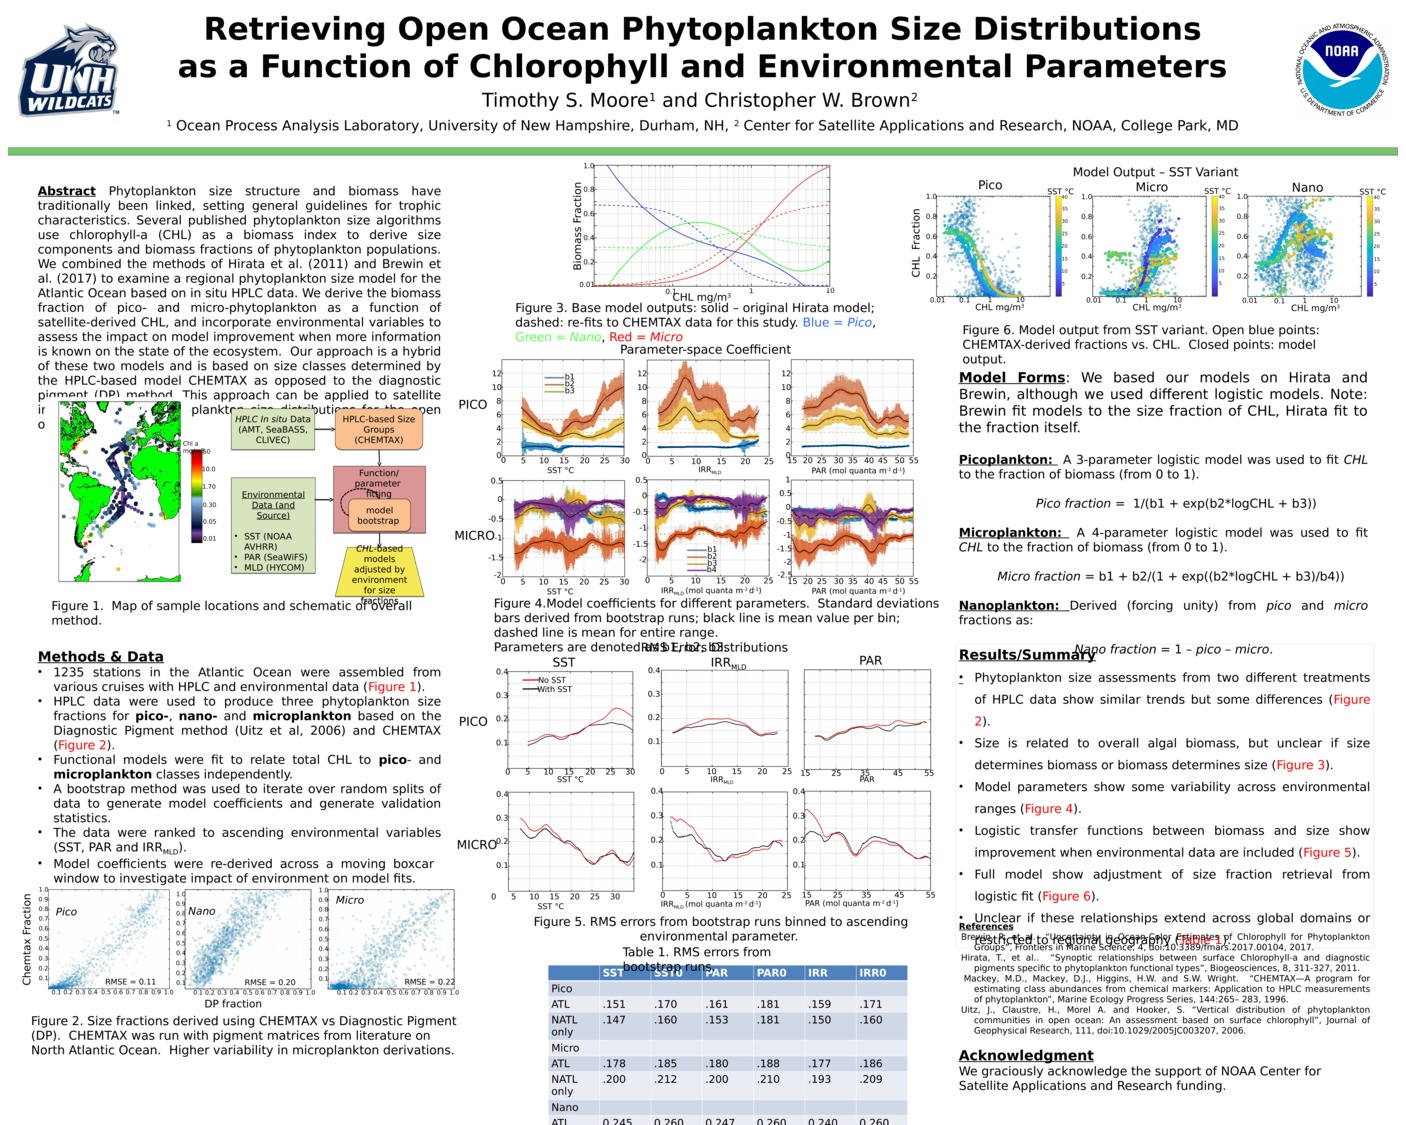 Retrieving Open Ocean Phytoplankton Size Distributions As A Function Of Chlorophyll And Environmental Parameters by tsmoore